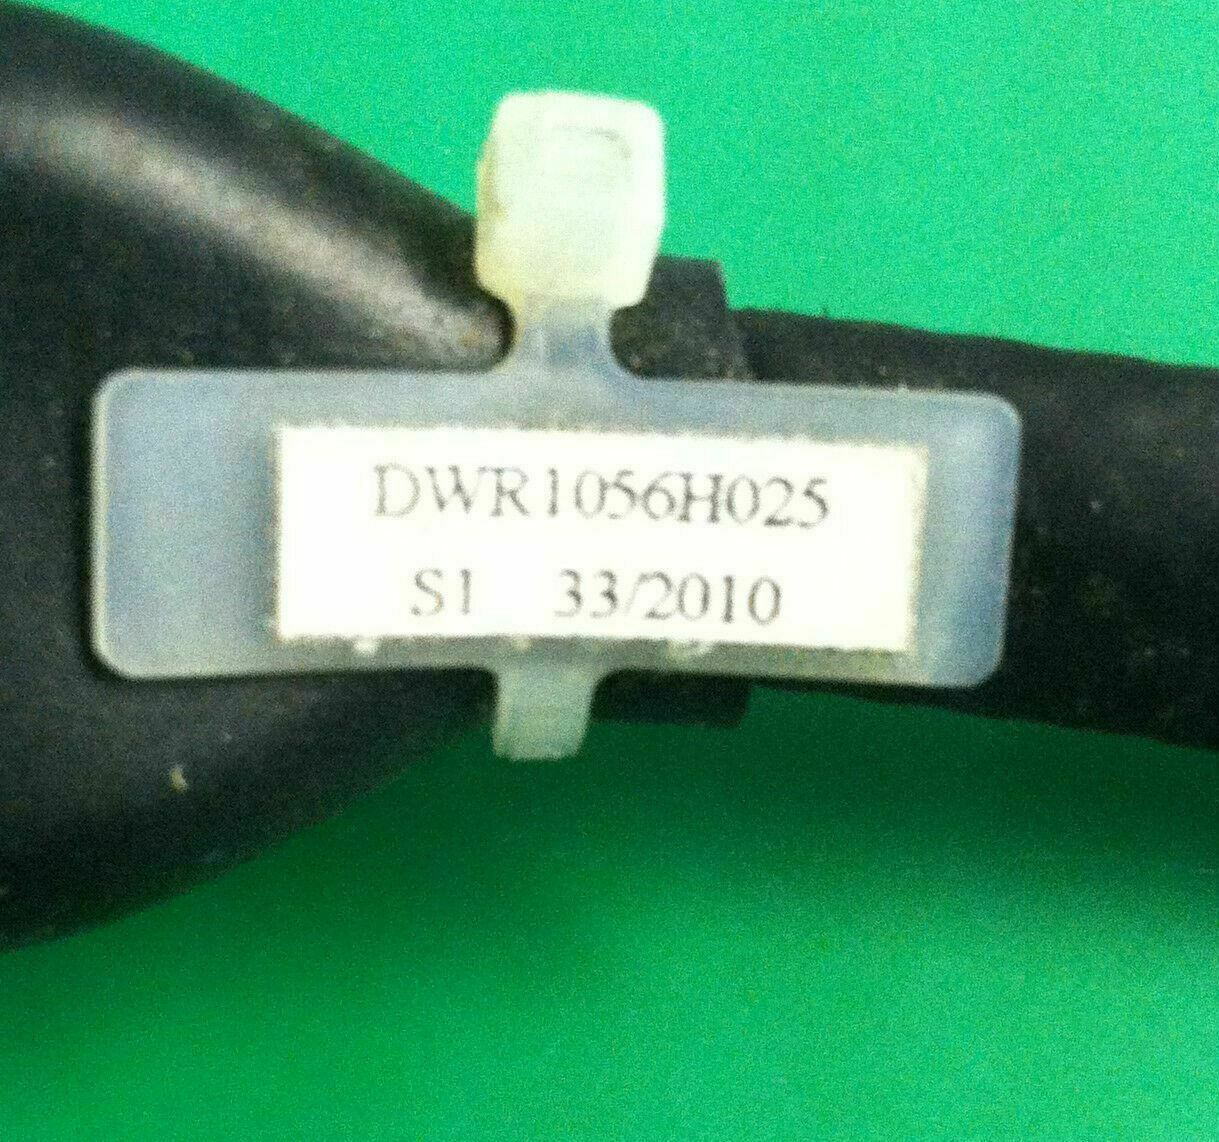 DWR1056H025 ELECTRONIC, HARNESS, MOTOR, RIGHT #5975